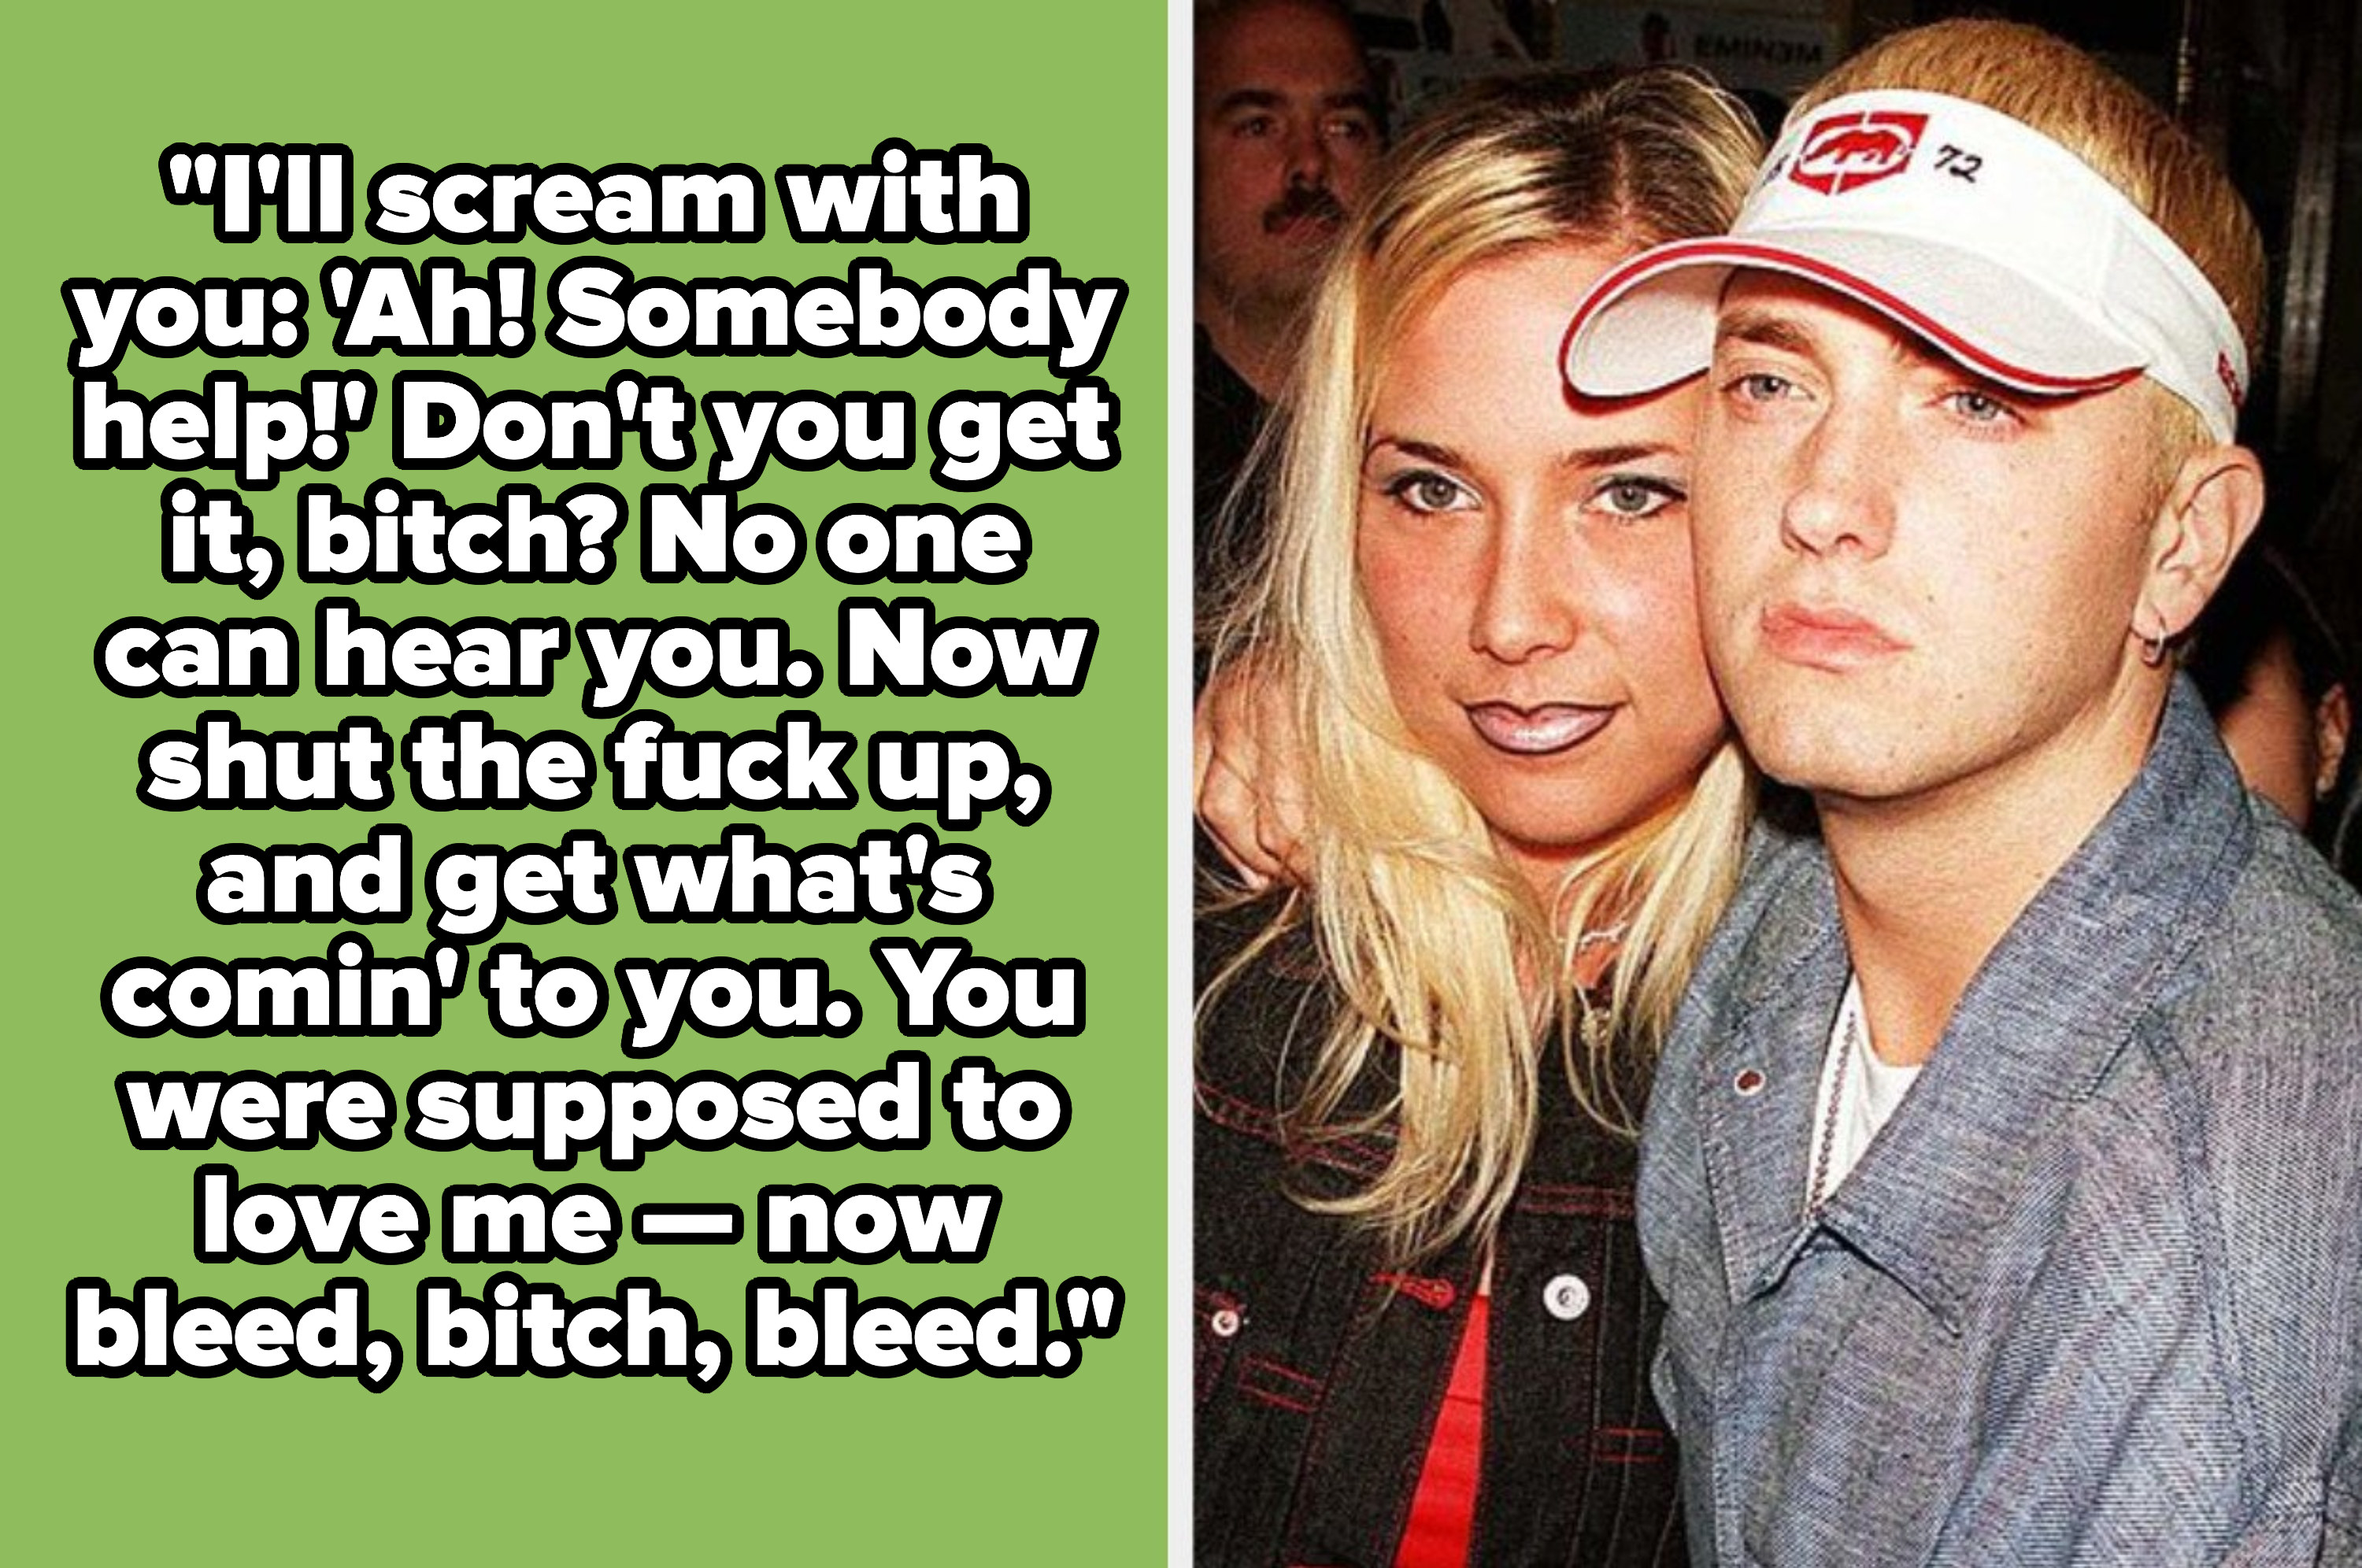 Eminem lyrics: &quot;Shut the fuck up, and gets what&#x27;s comin&#x27; to you&quot;